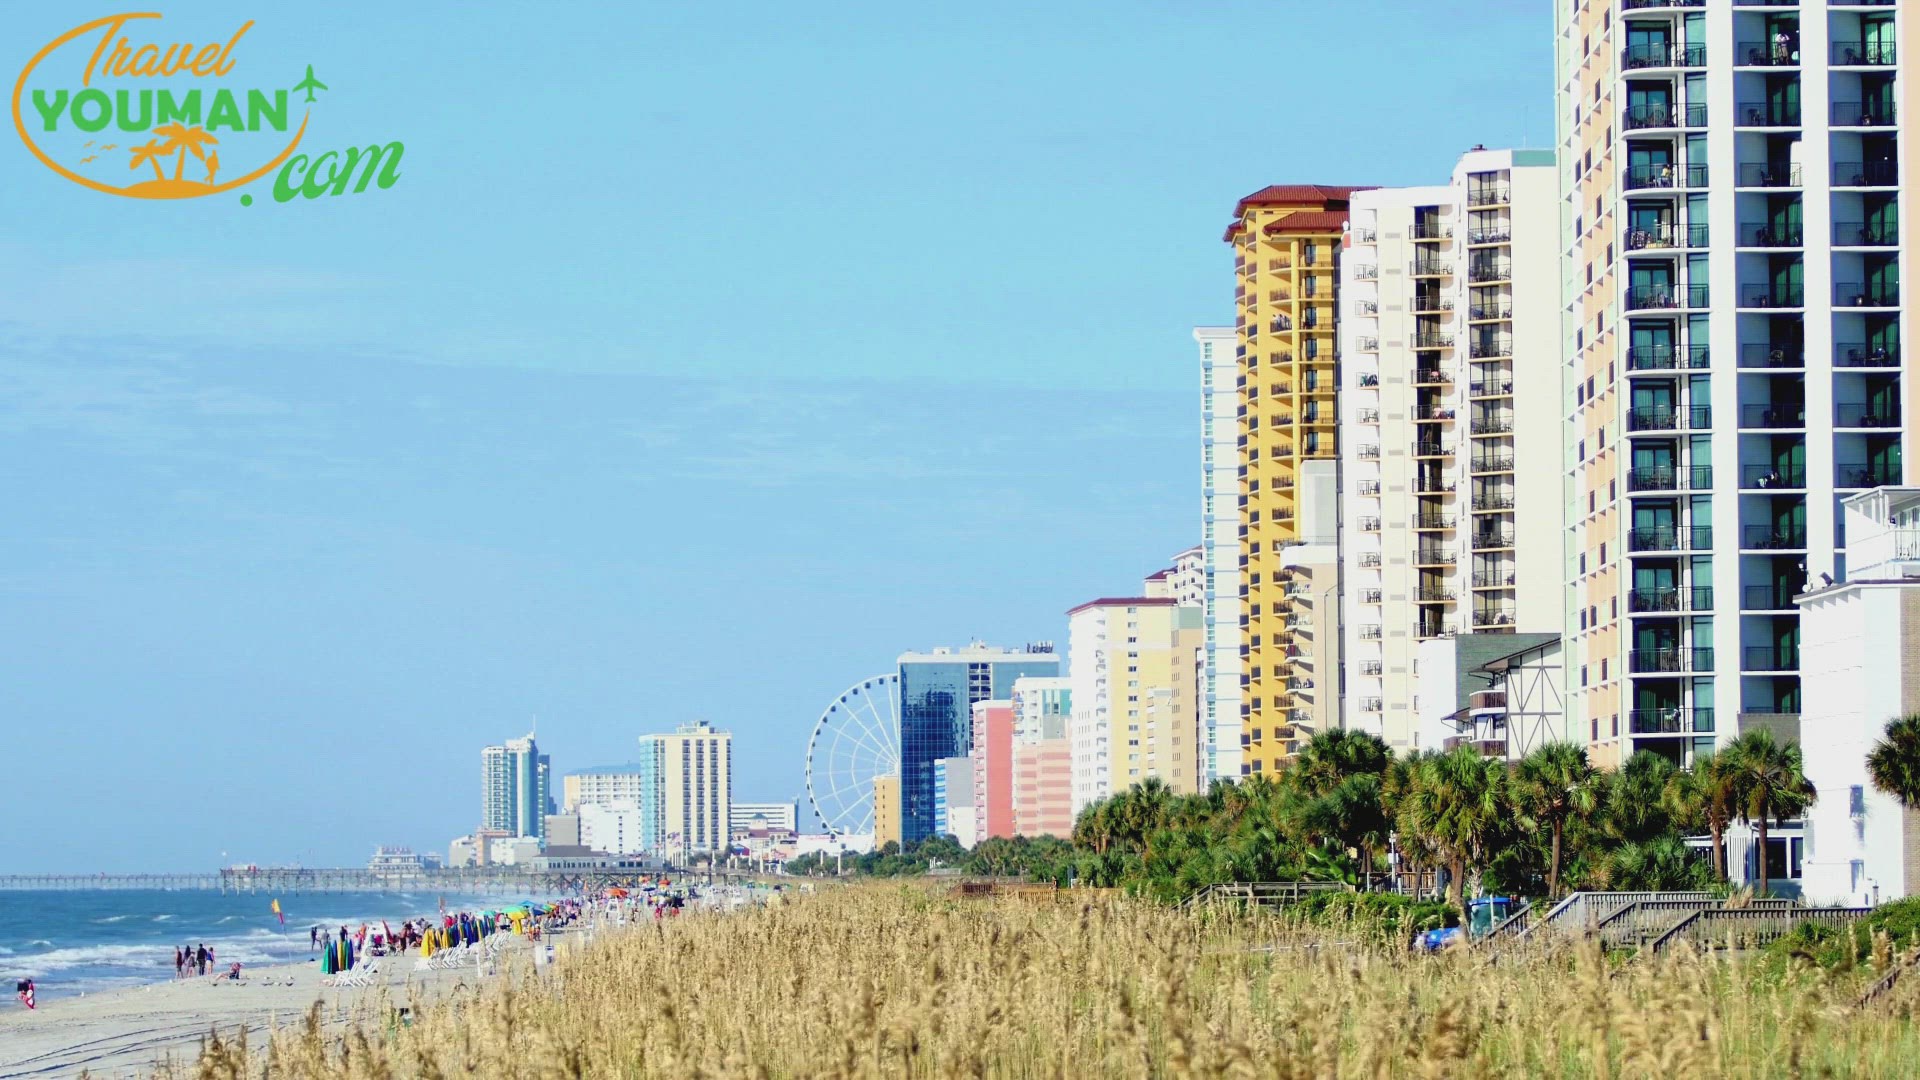 'Video thumbnail for Is there a difference? North Myrtle Beach VS Myrtle Beach'